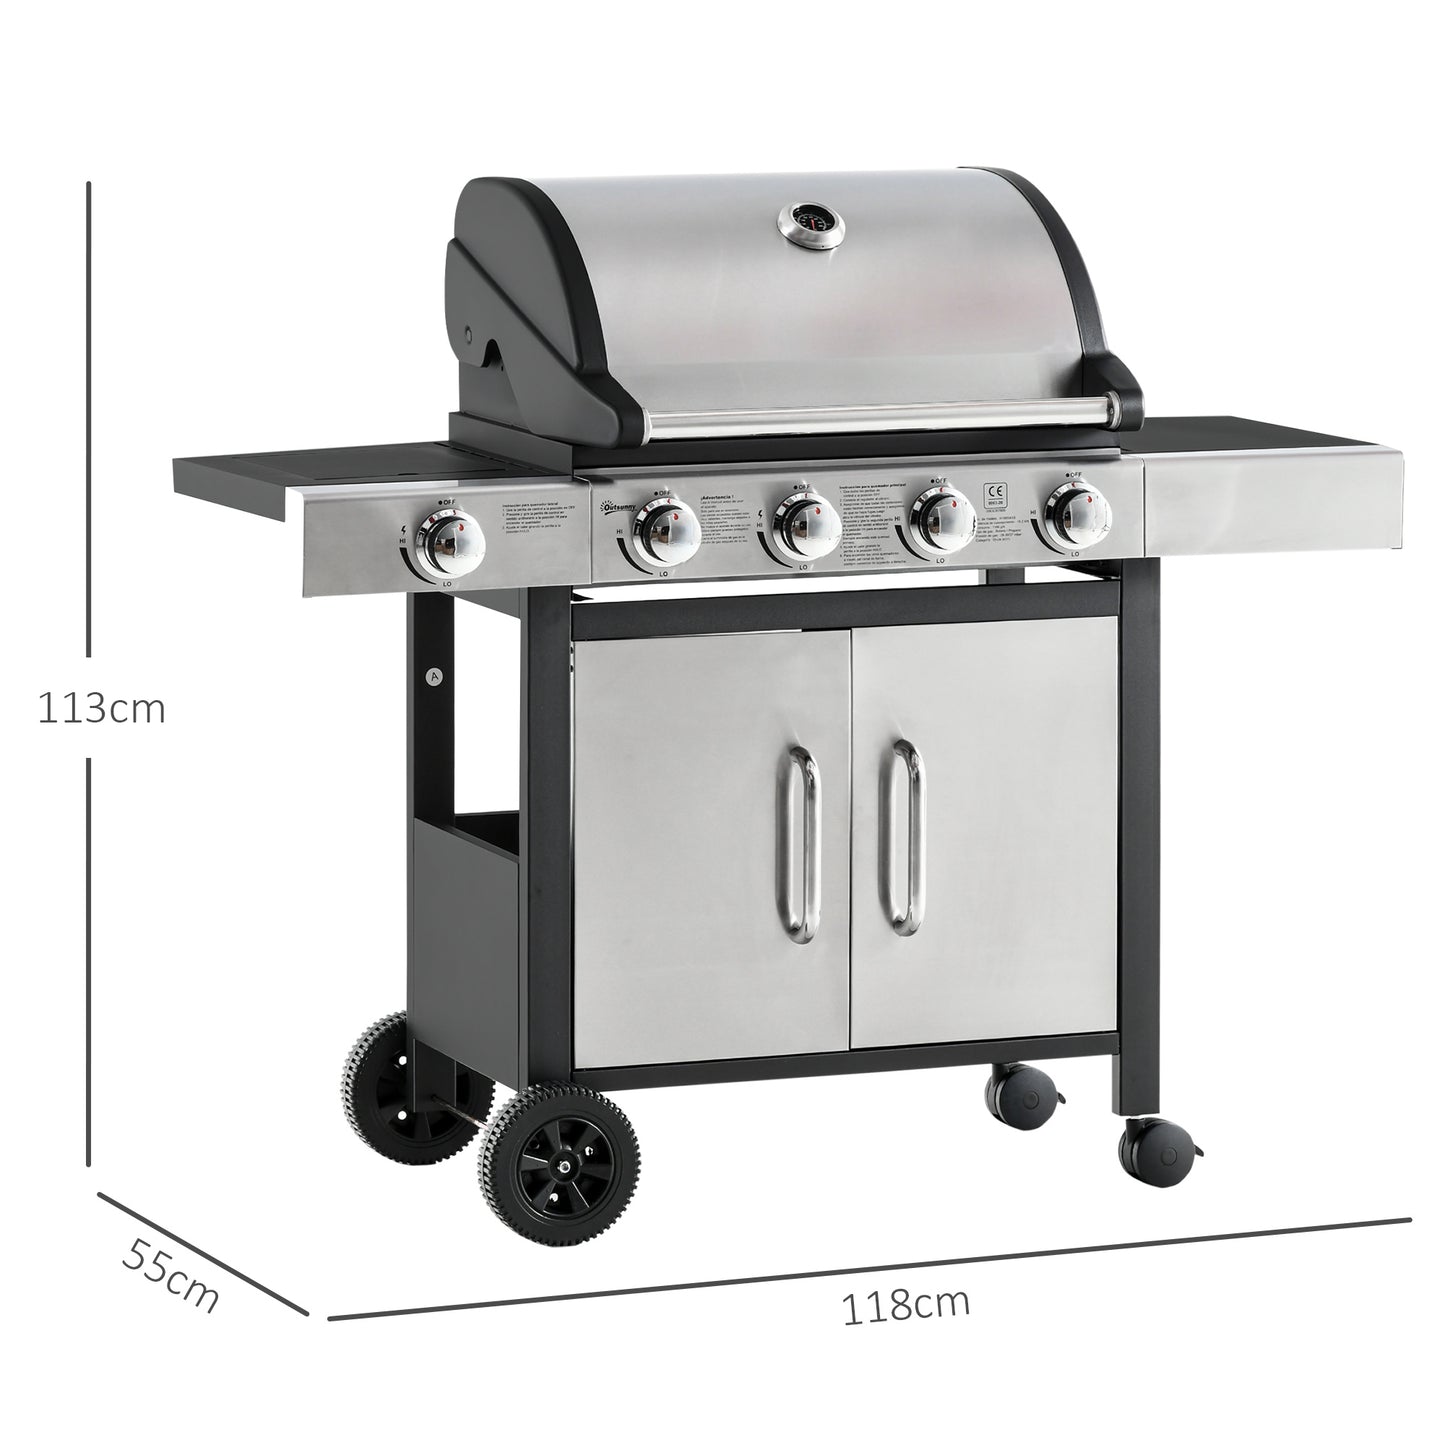 Outsunny Gas Burner Barbecue Grill 4+1 Burner Garden BBQ Trolley w/ Side Burner Warming Rack Side Shelves Storage Cabinet Piezo Ignition Thermometer